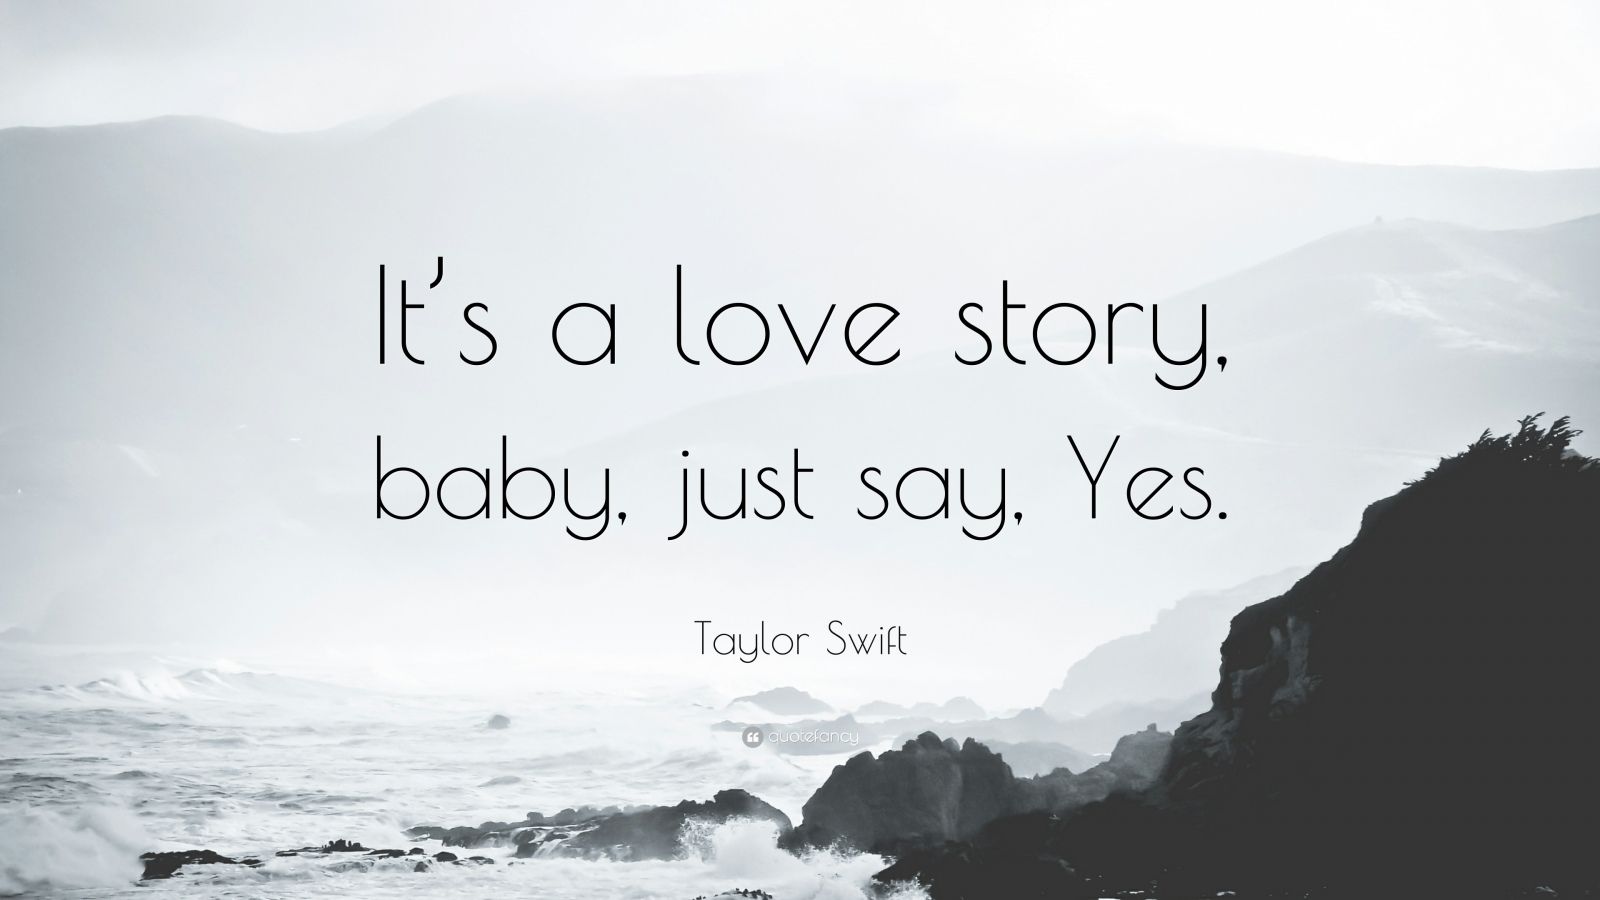 Taylor Swift Quote: “It's a love story, baby, just say, Yes.” (7 wallpaper)